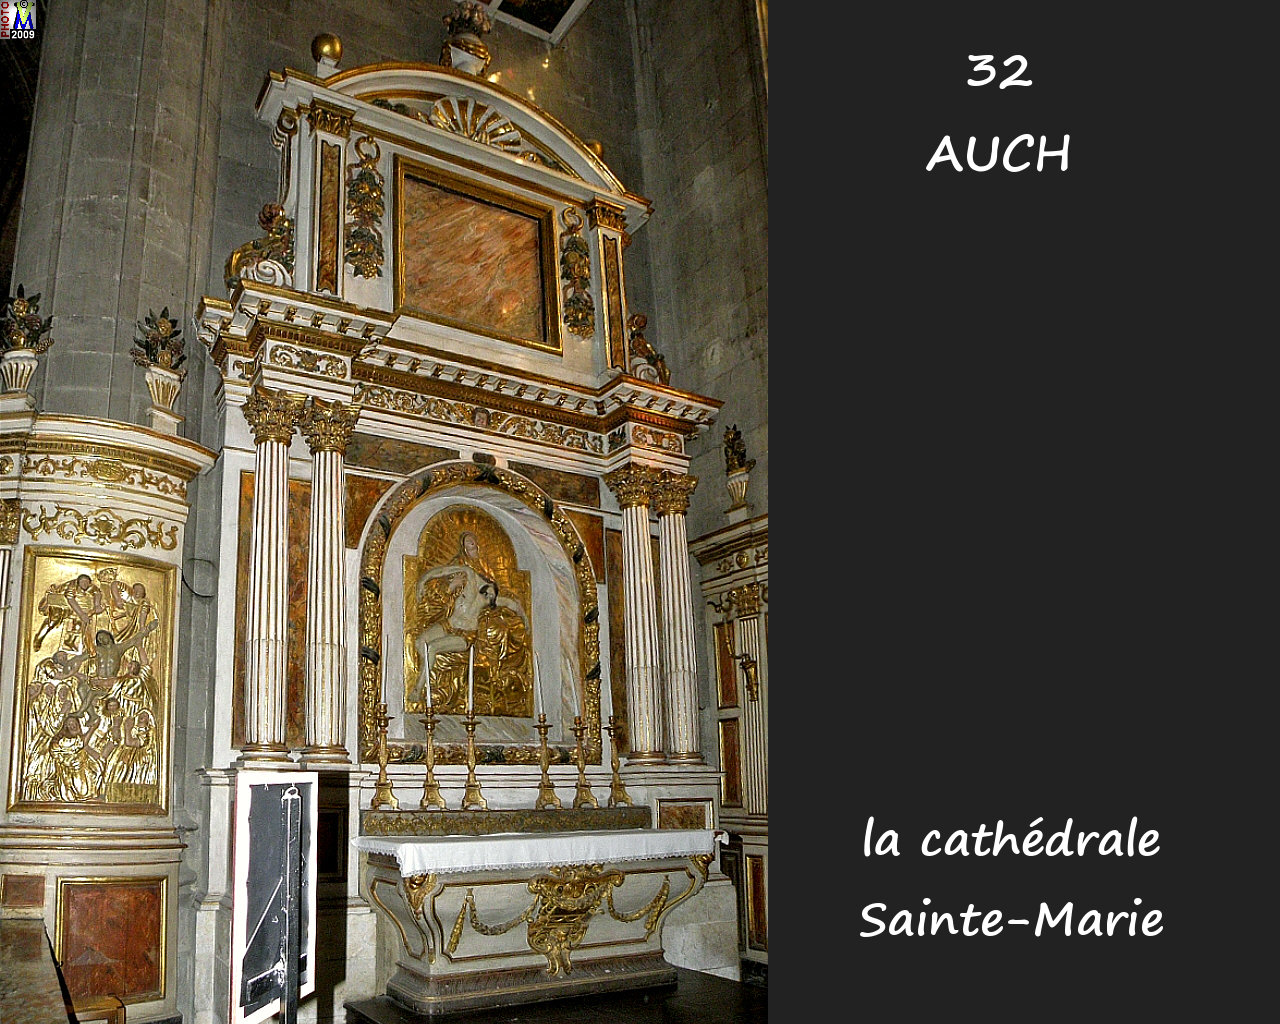 32AUCH_cathedrale_220.jpg